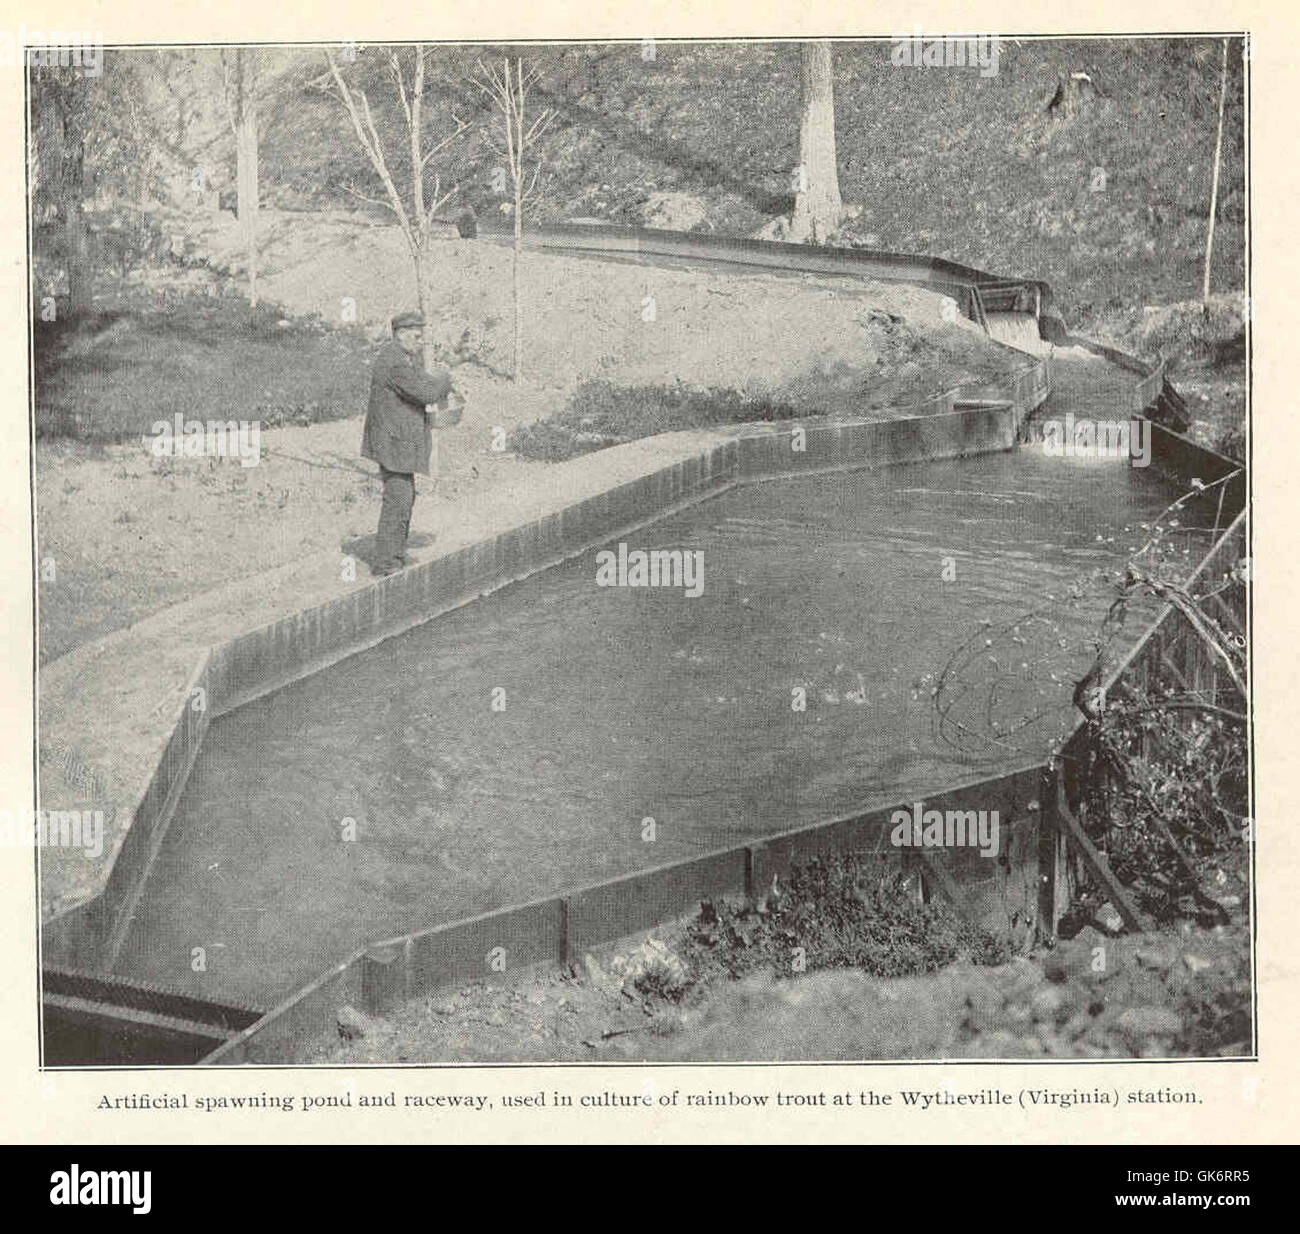 42340 Artificial spawning pond and raceway, used in culture of rainbow trout at the Wytheville (Virginia) station Stock Photo